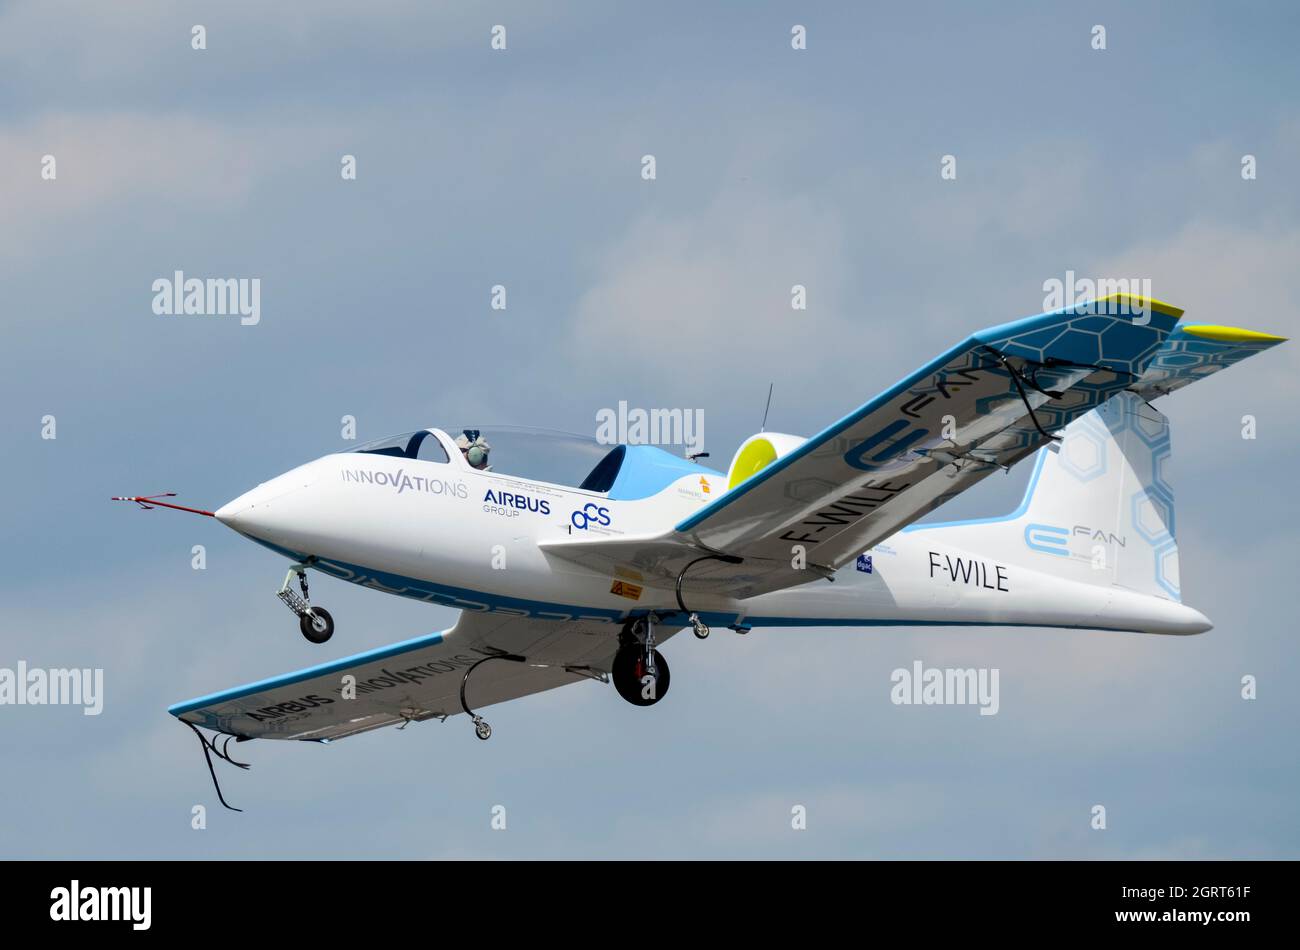 Airbus E-Fan is a prototype two-seat electric aircraft being developed by Airbus Group. Flying at the Farnborough Airshow 2014 Stock Photo